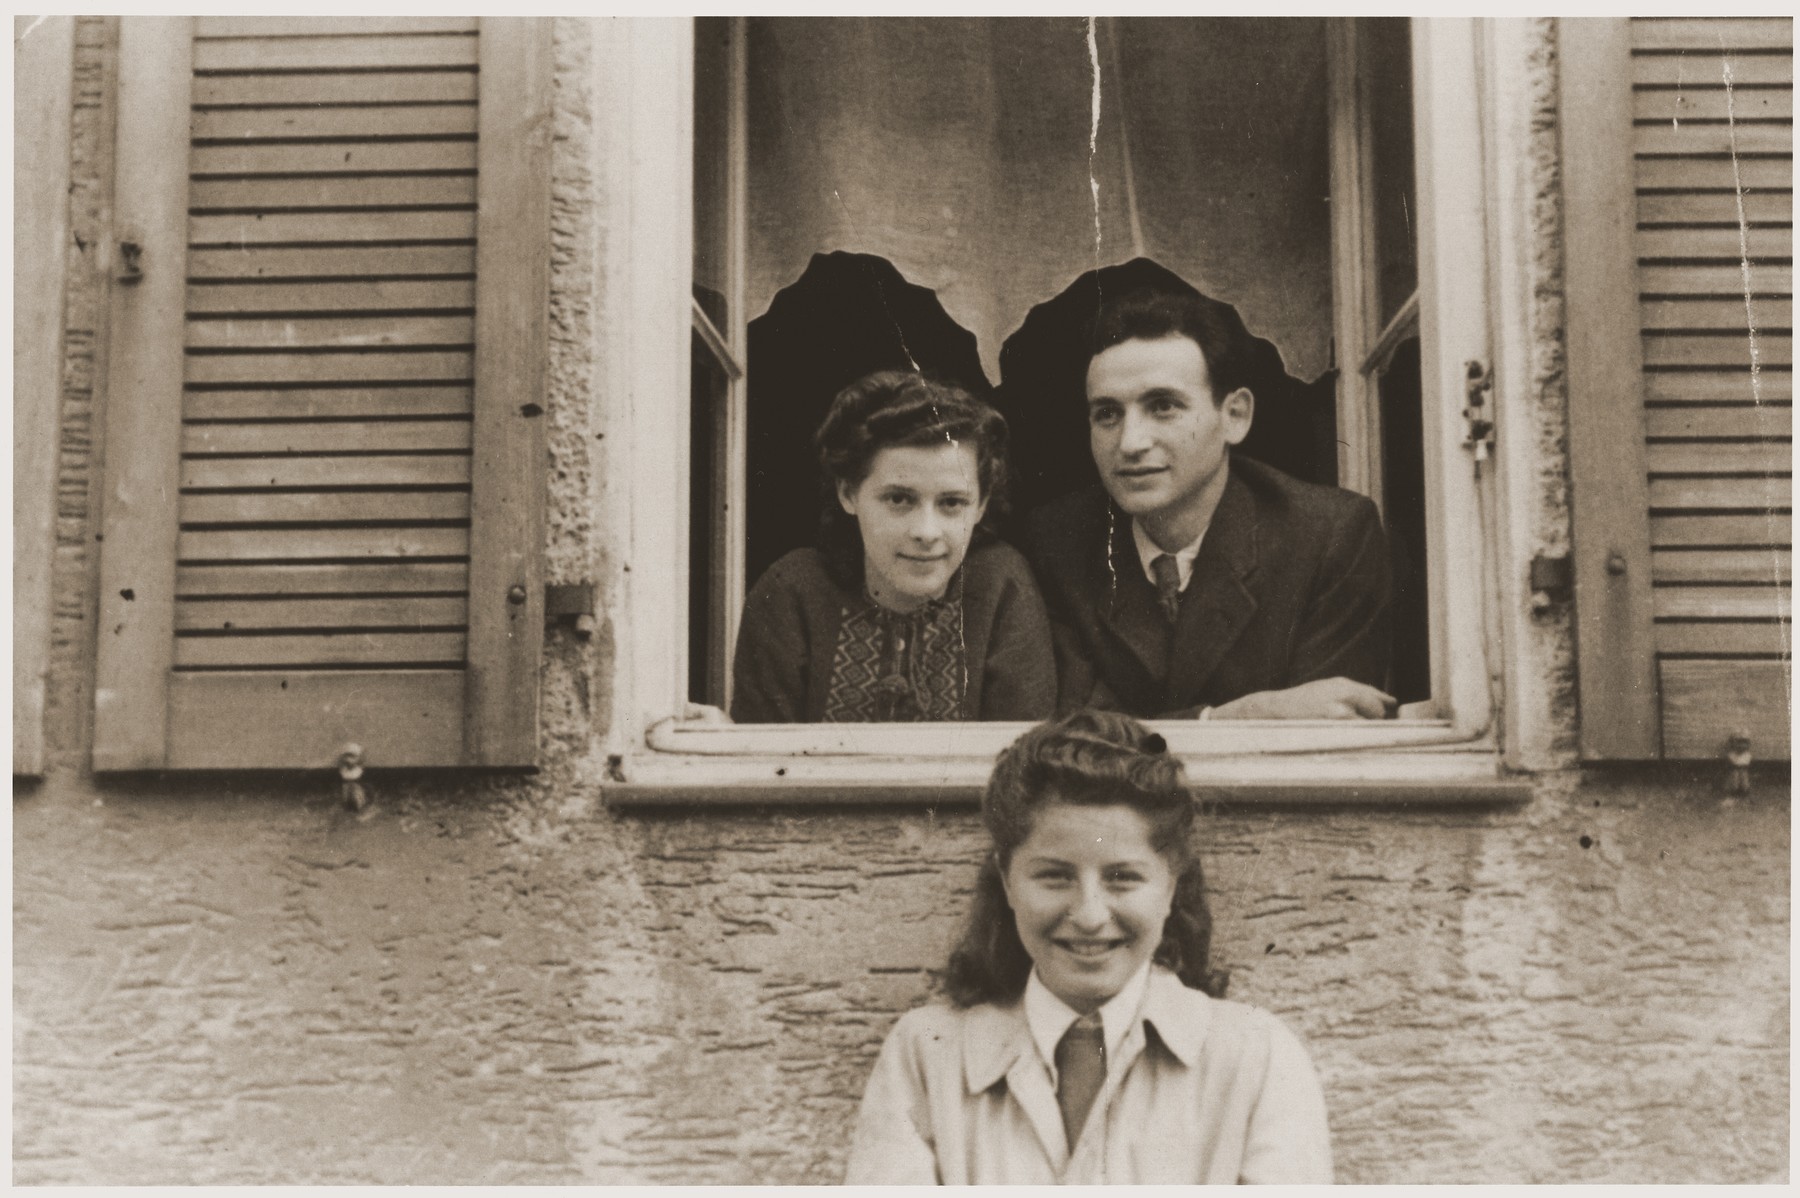 Hania Goldman (bottom) poses beneath a young couple, who are looking out the window of their room in the Fuerth displaced persons camp.